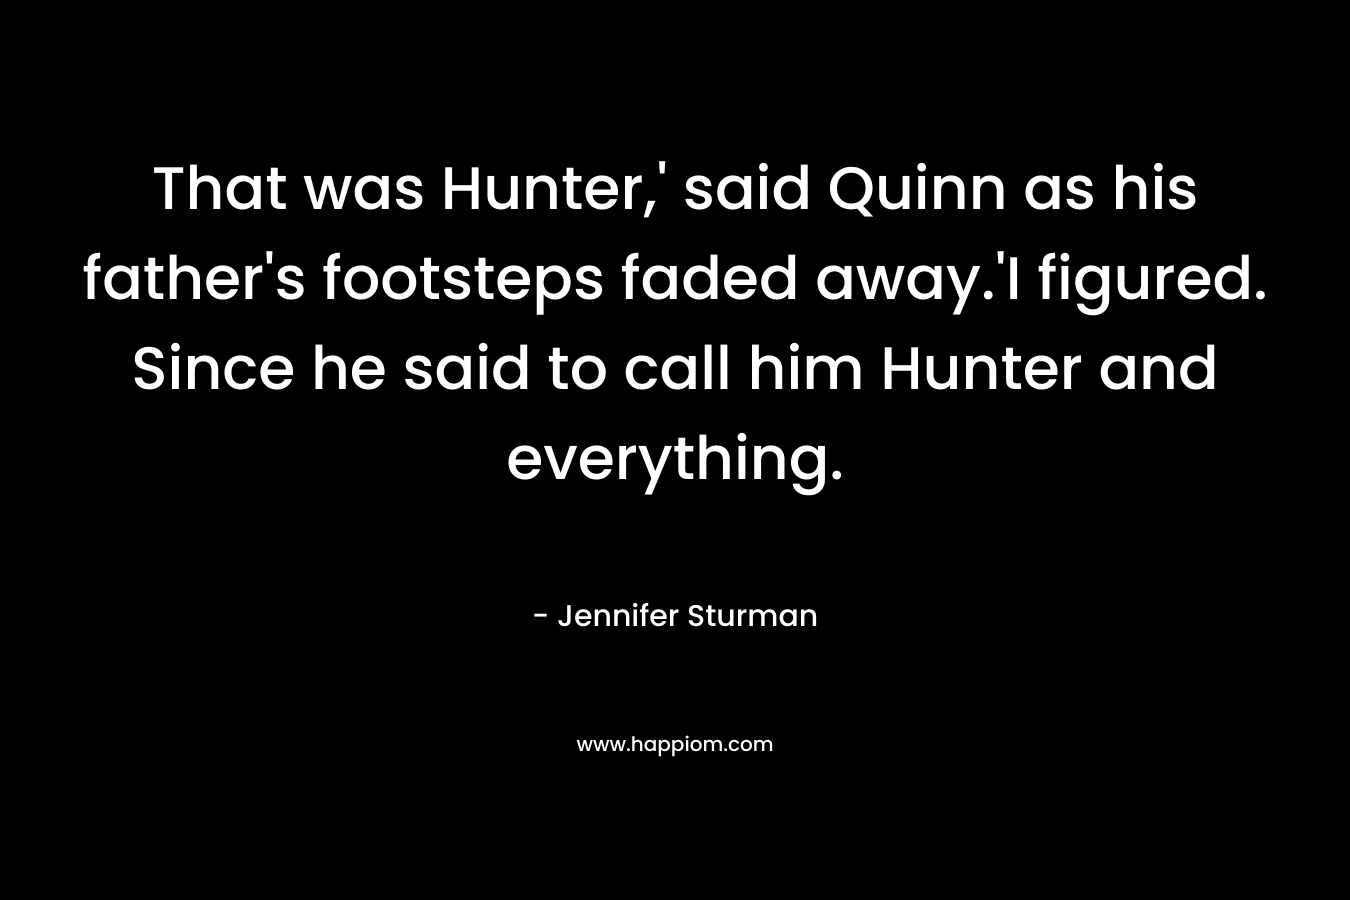 That was Hunter,’ said Quinn as his father’s footsteps faded away.’I figured. Since he said to call him Hunter and everything. – Jennifer Sturman